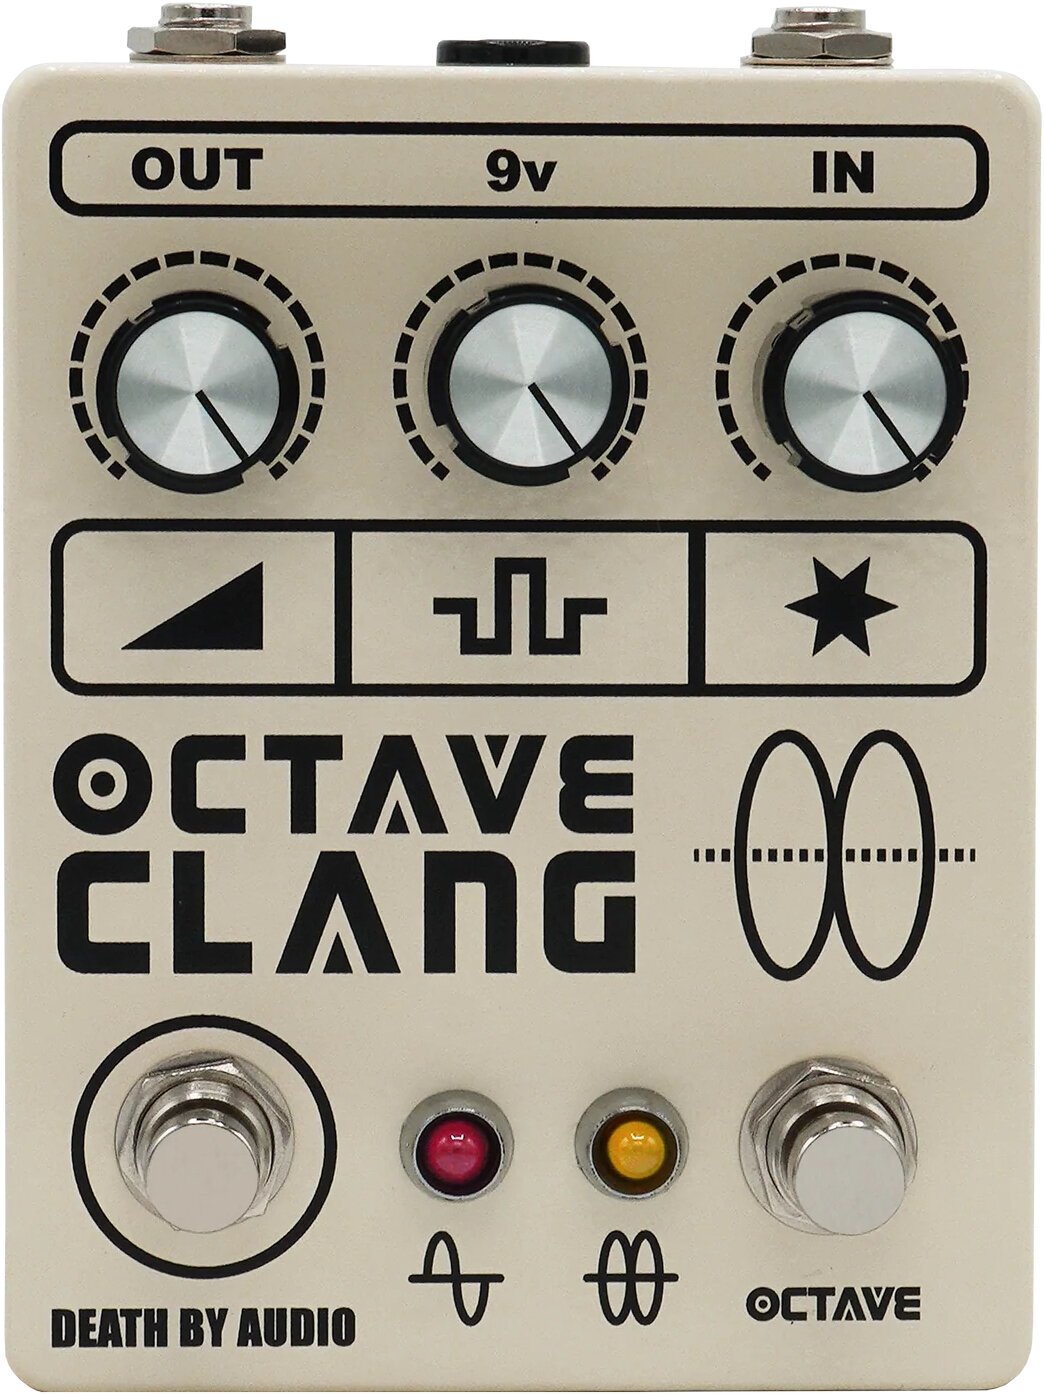 Guitar Effect Death By Audio Octave Clang V2